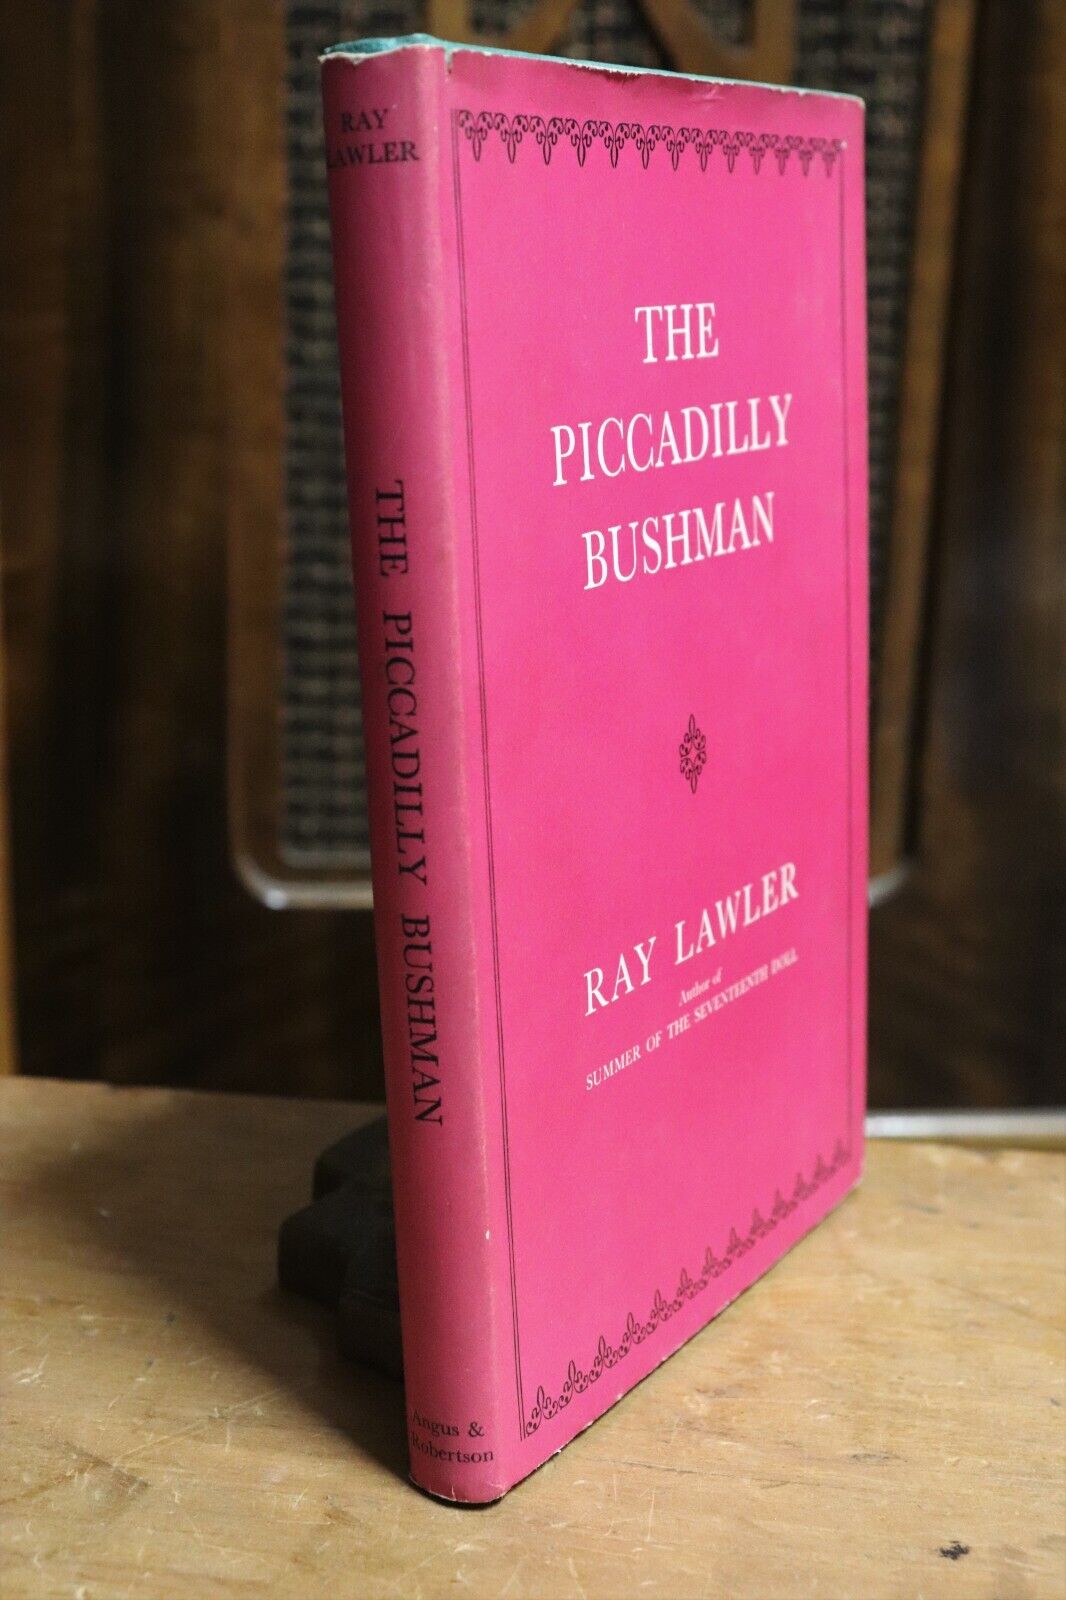 The Piccadilly Bushman by Ray Lawler - 1961 - Australian Literature Book - 0